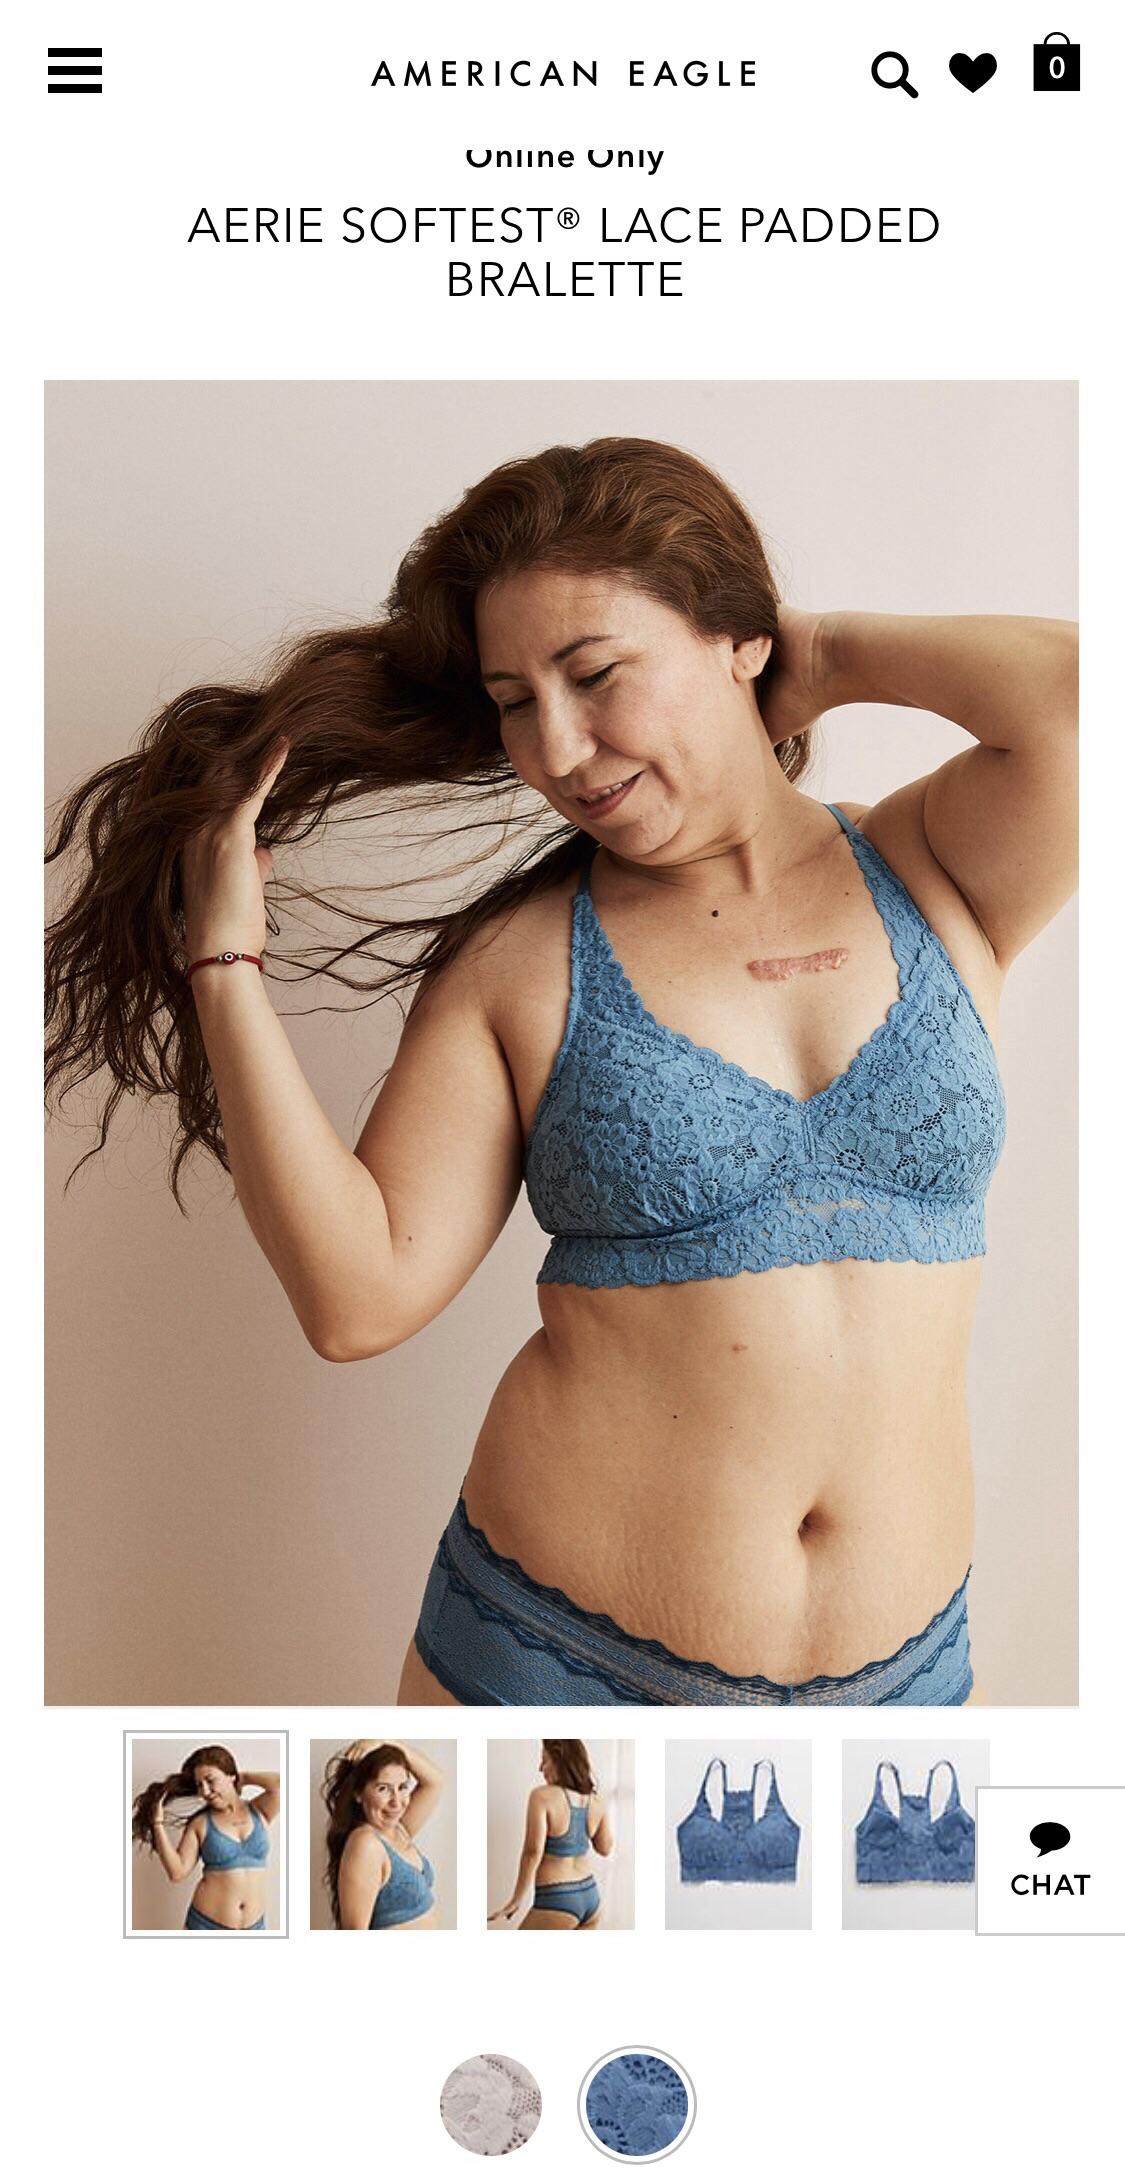 American Eagle has started using unretouched women to model their